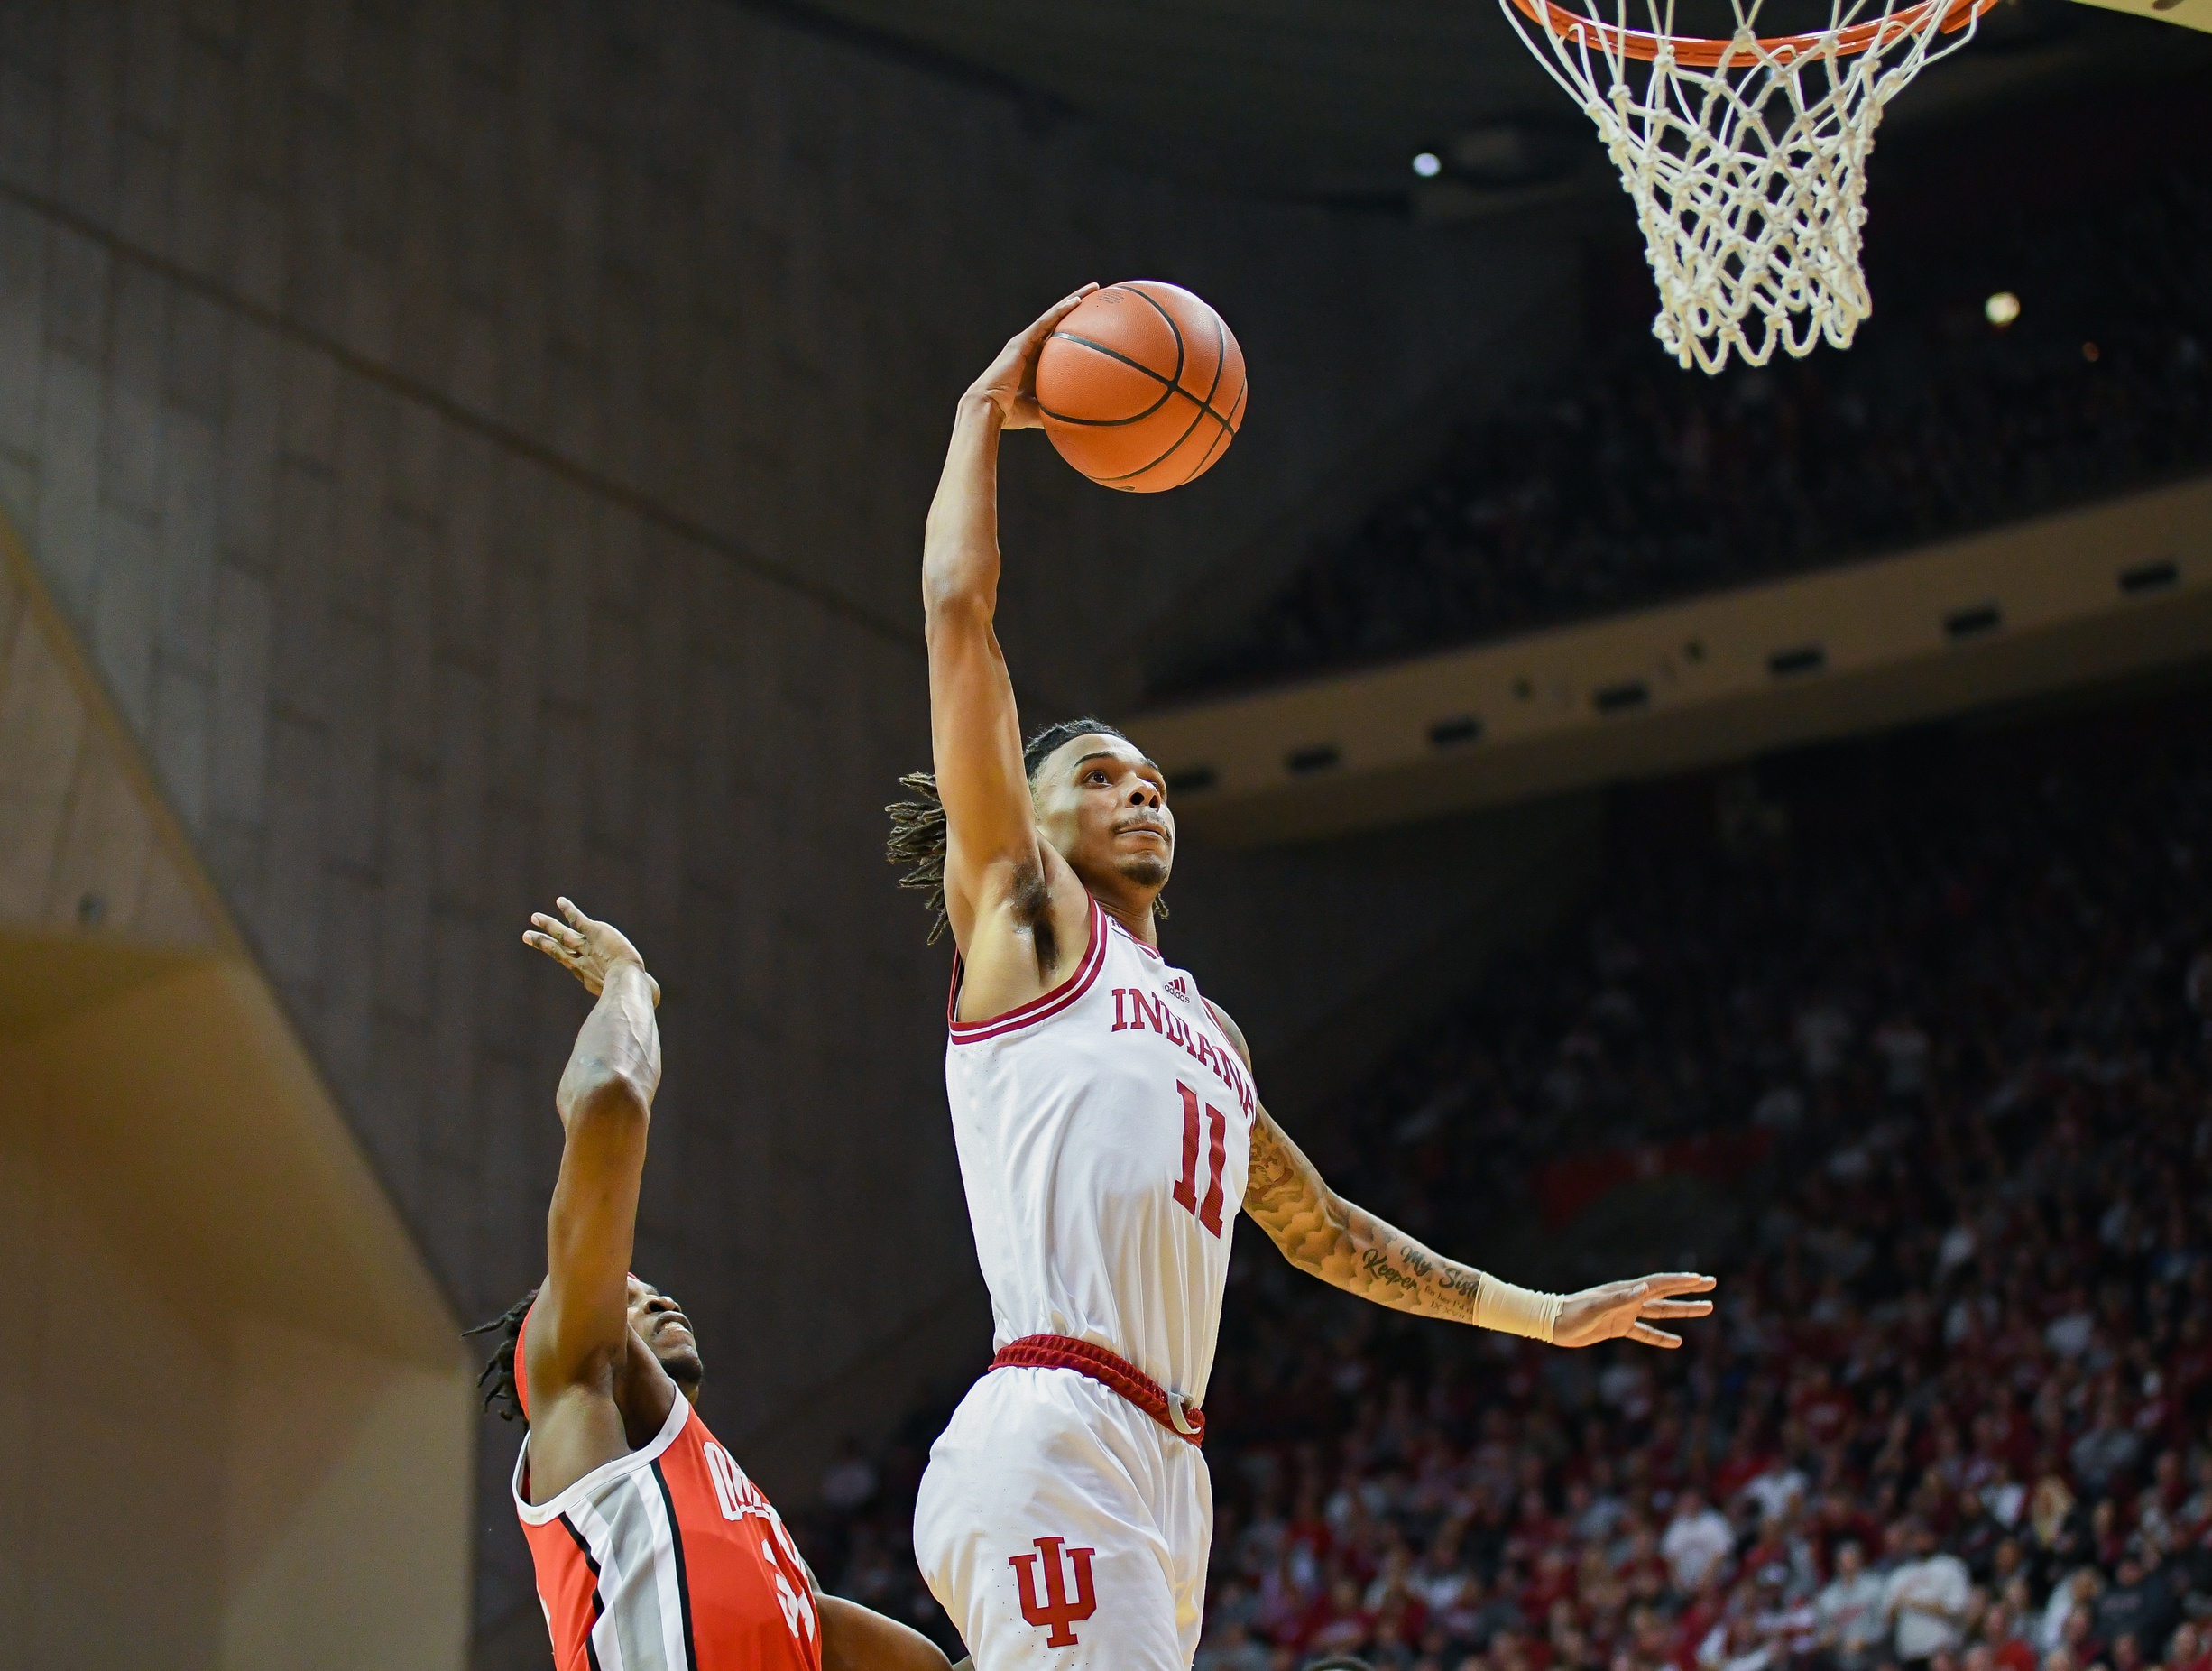 Indiana Hoosiers guard CJ Gunn (11) goes up for a dunk past Ohio State Buckeyes center Felix Okpara (34) during the first half at Simon Skjodt Assembly Hall.